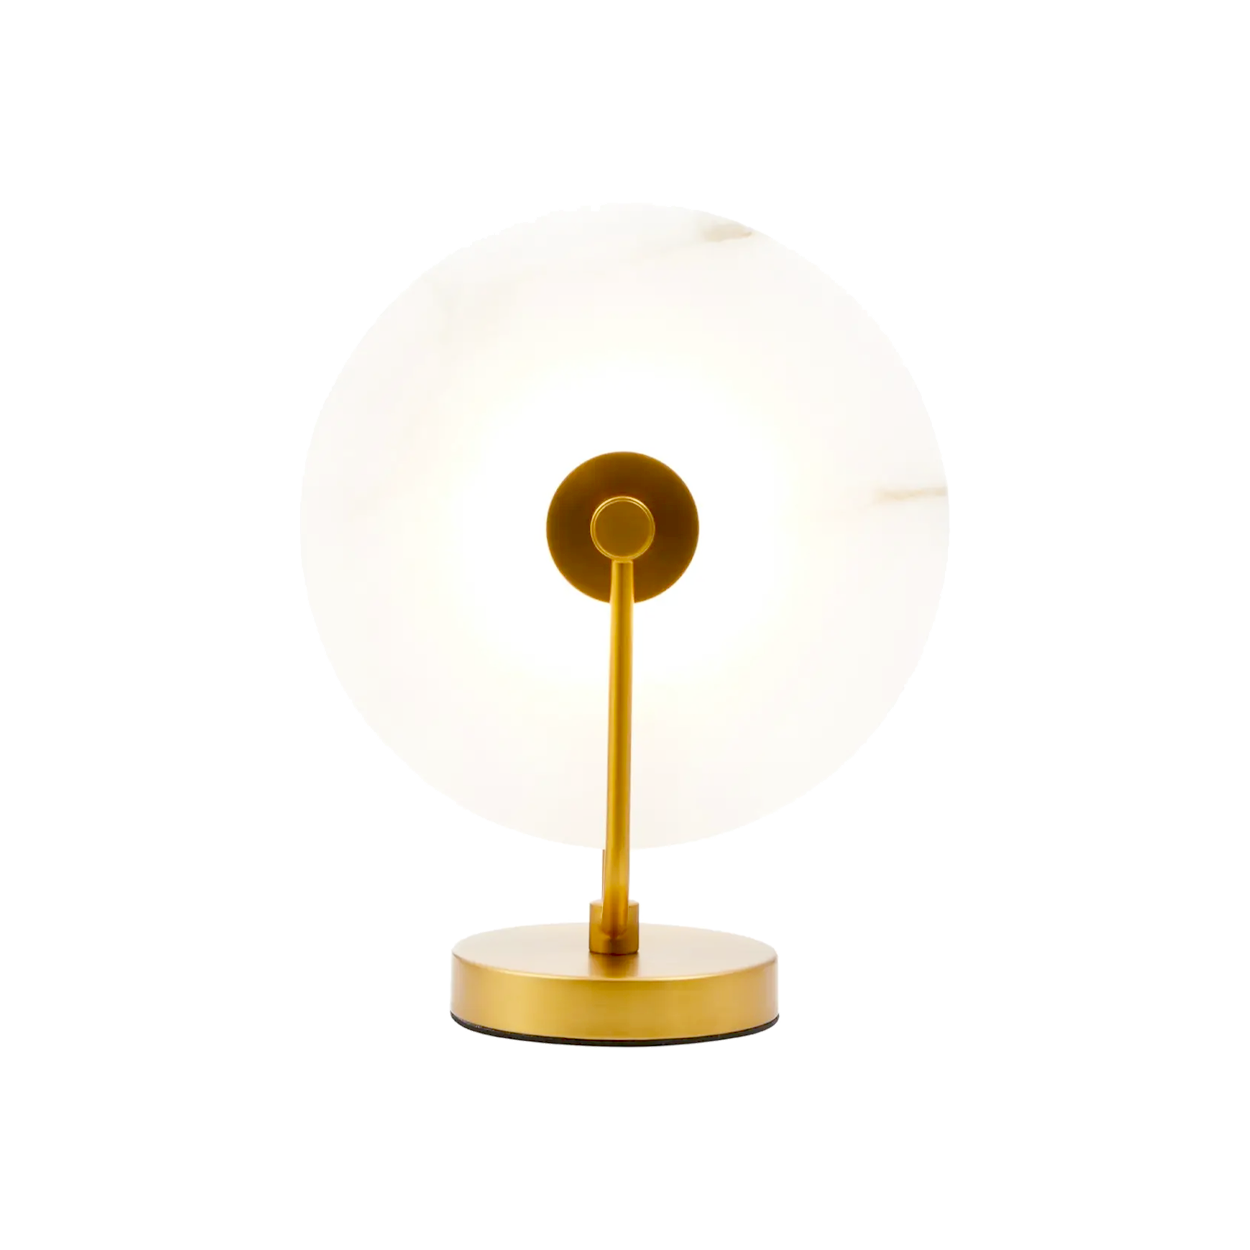 White Marble & Gold Finish Table Lamp